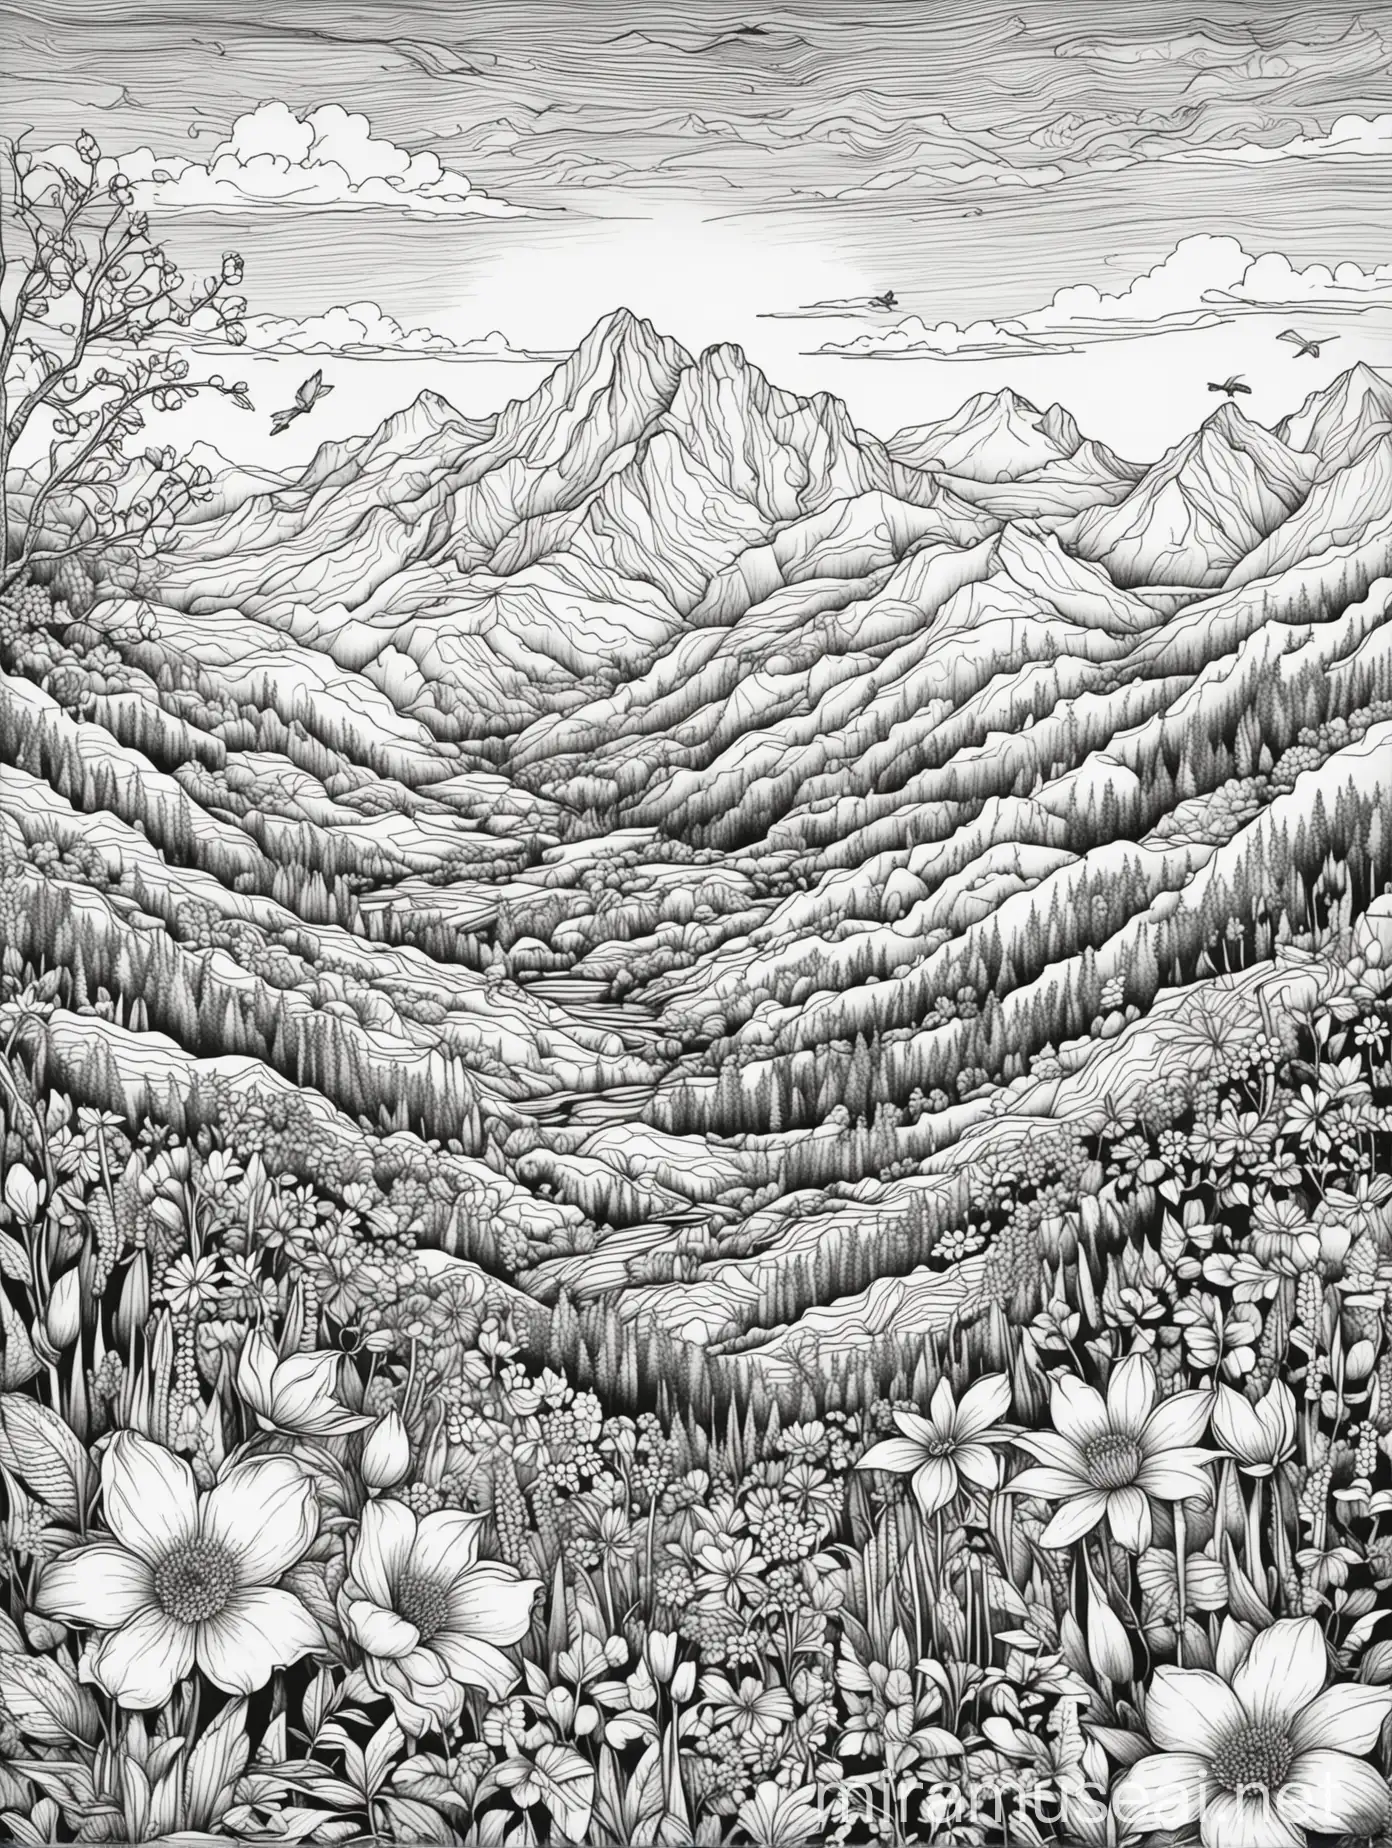 Spring Adult Coloring Page Floral Landscape with Mountain Borders